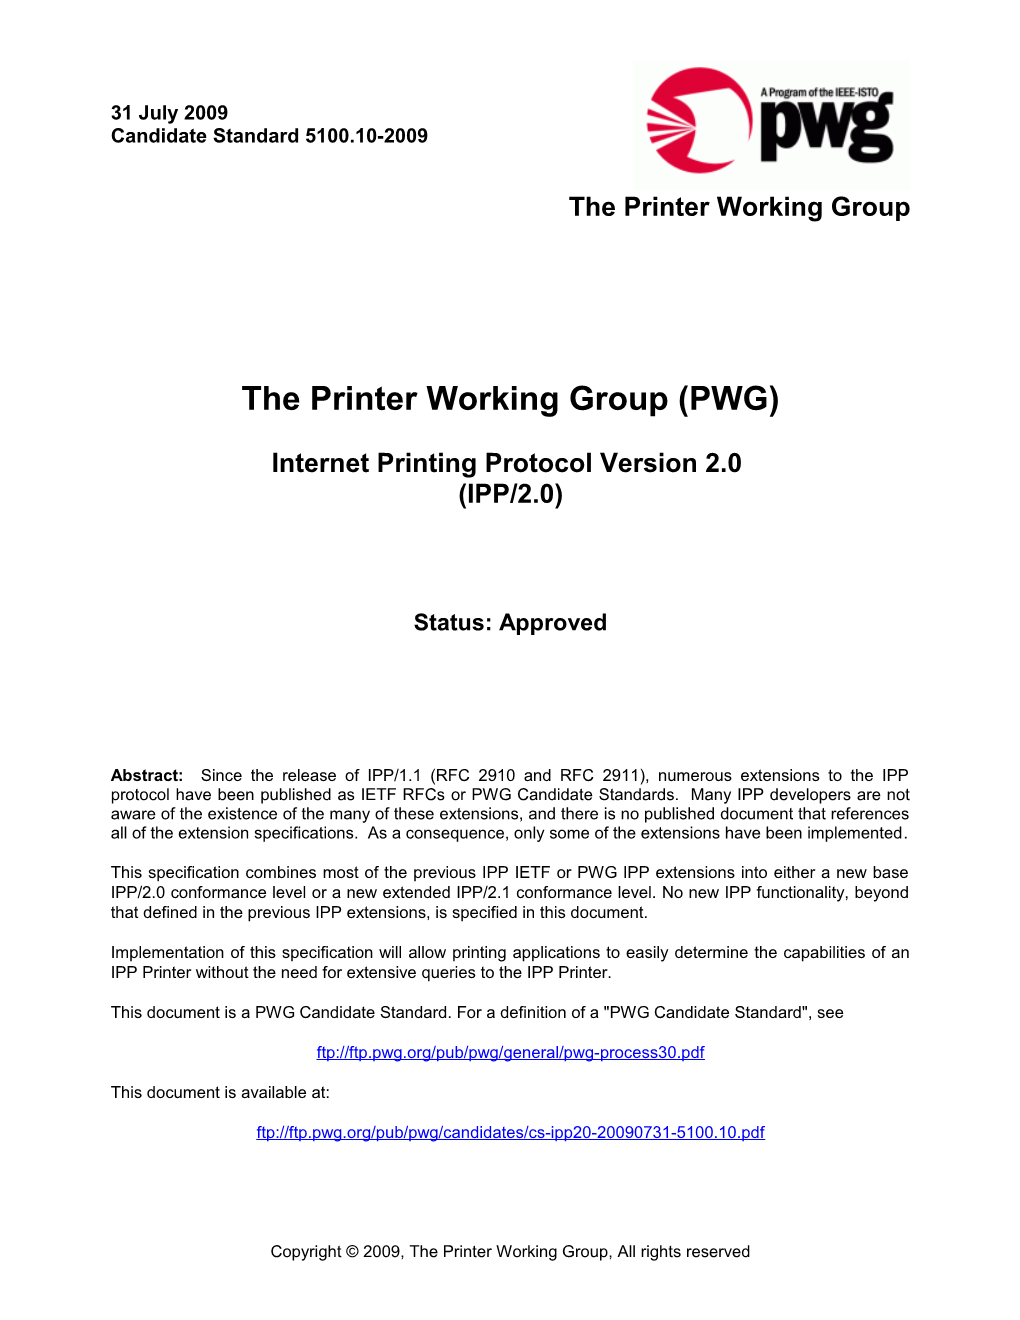 The Printer Working Group